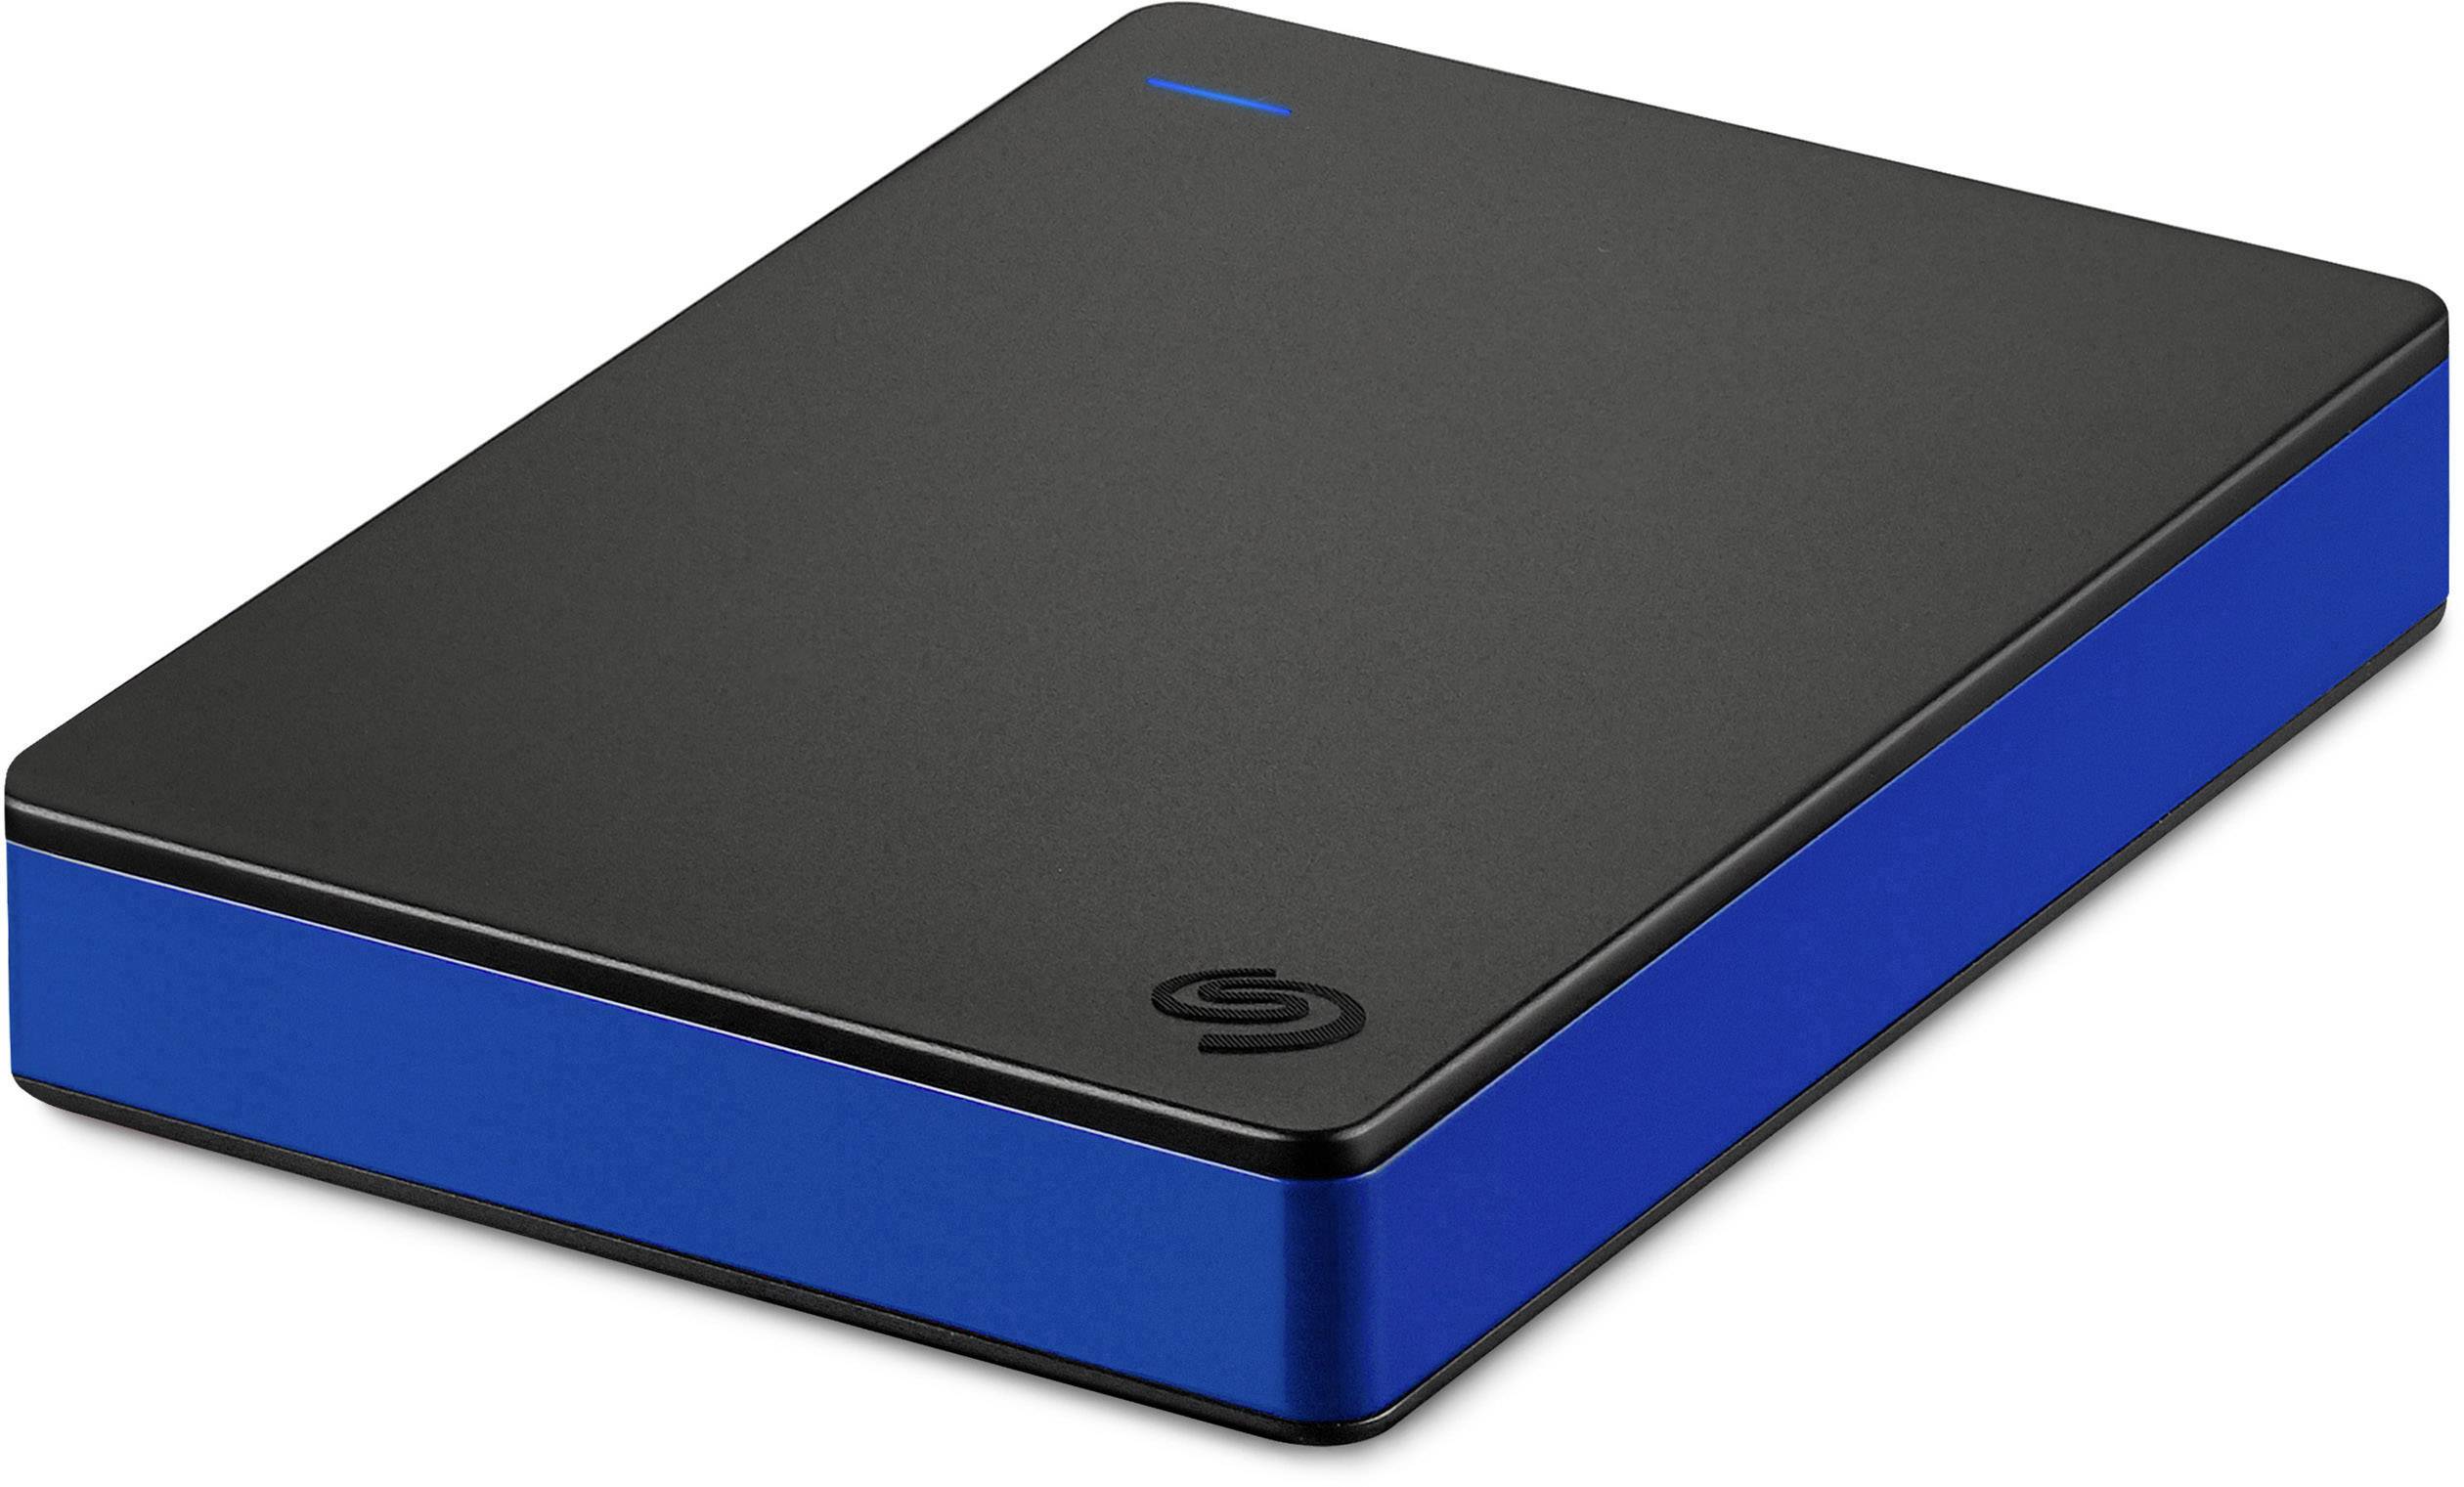 terabyte drive for ps4